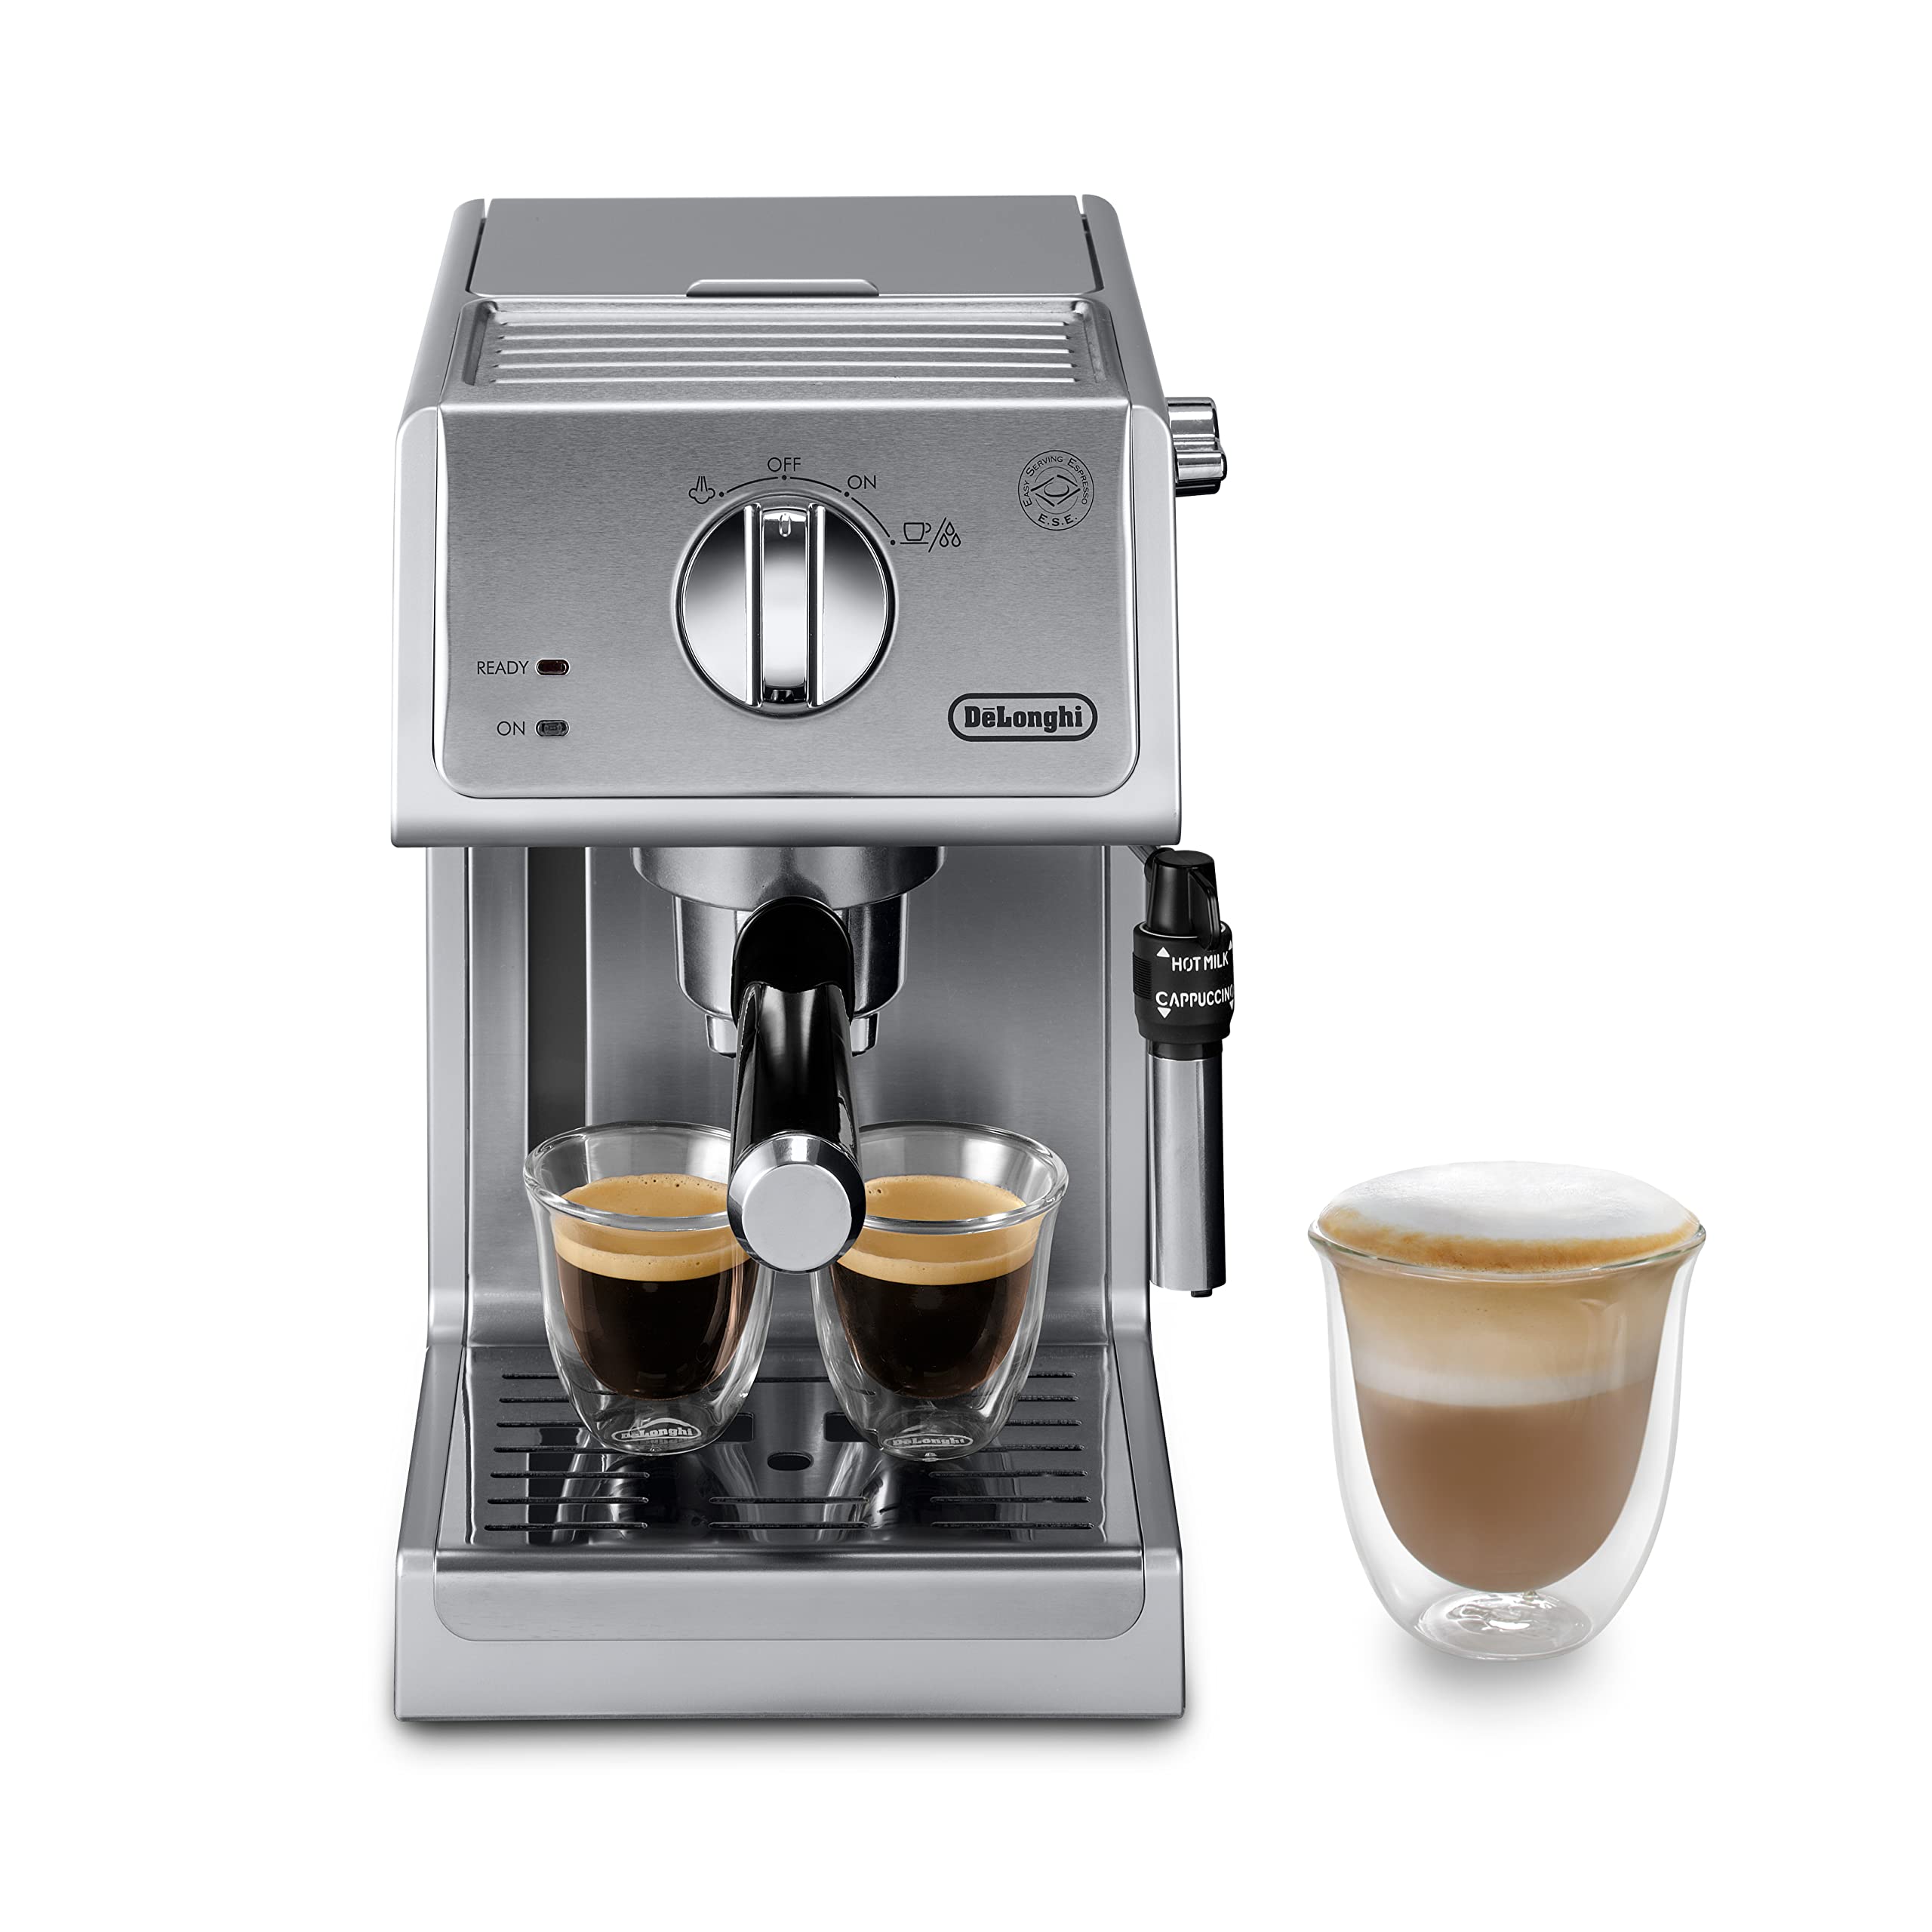 De'Longhi 15 Bar Pump Espresso and Cappuccino Machine w/ Milk Frother (Stainless Steel) $124 + Free Shipping